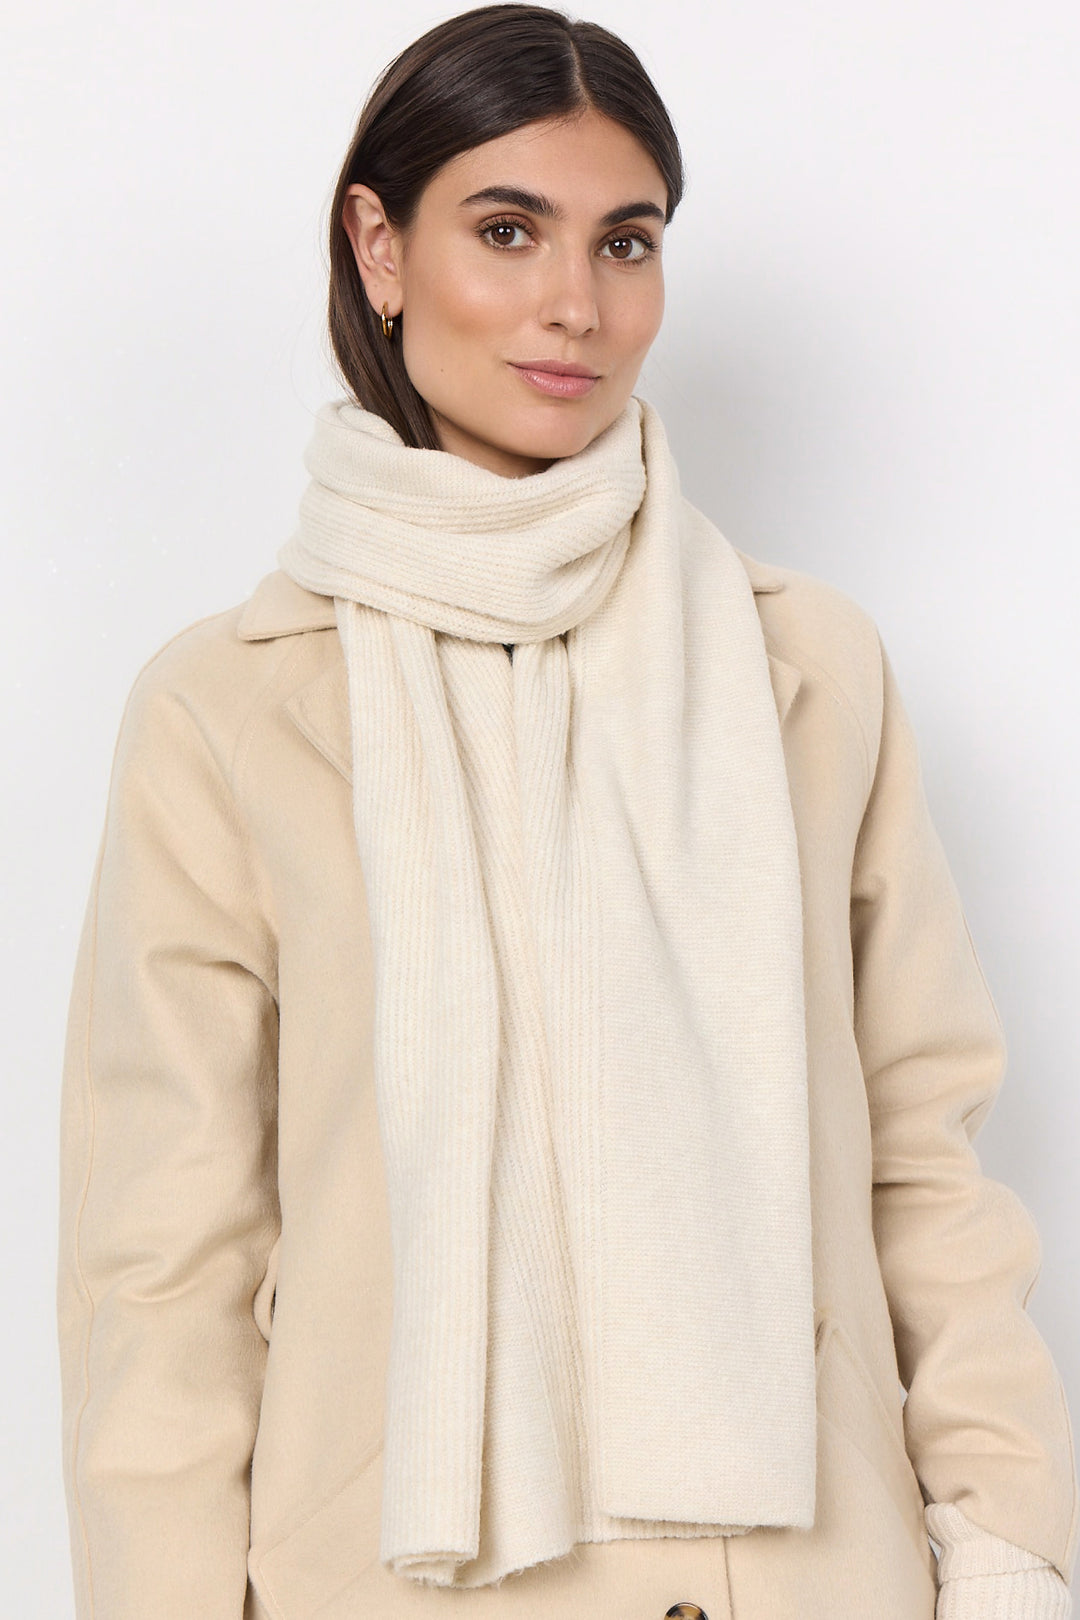 This rectangular scarf features classic fall colours of black & cream to perfectly complement your look.